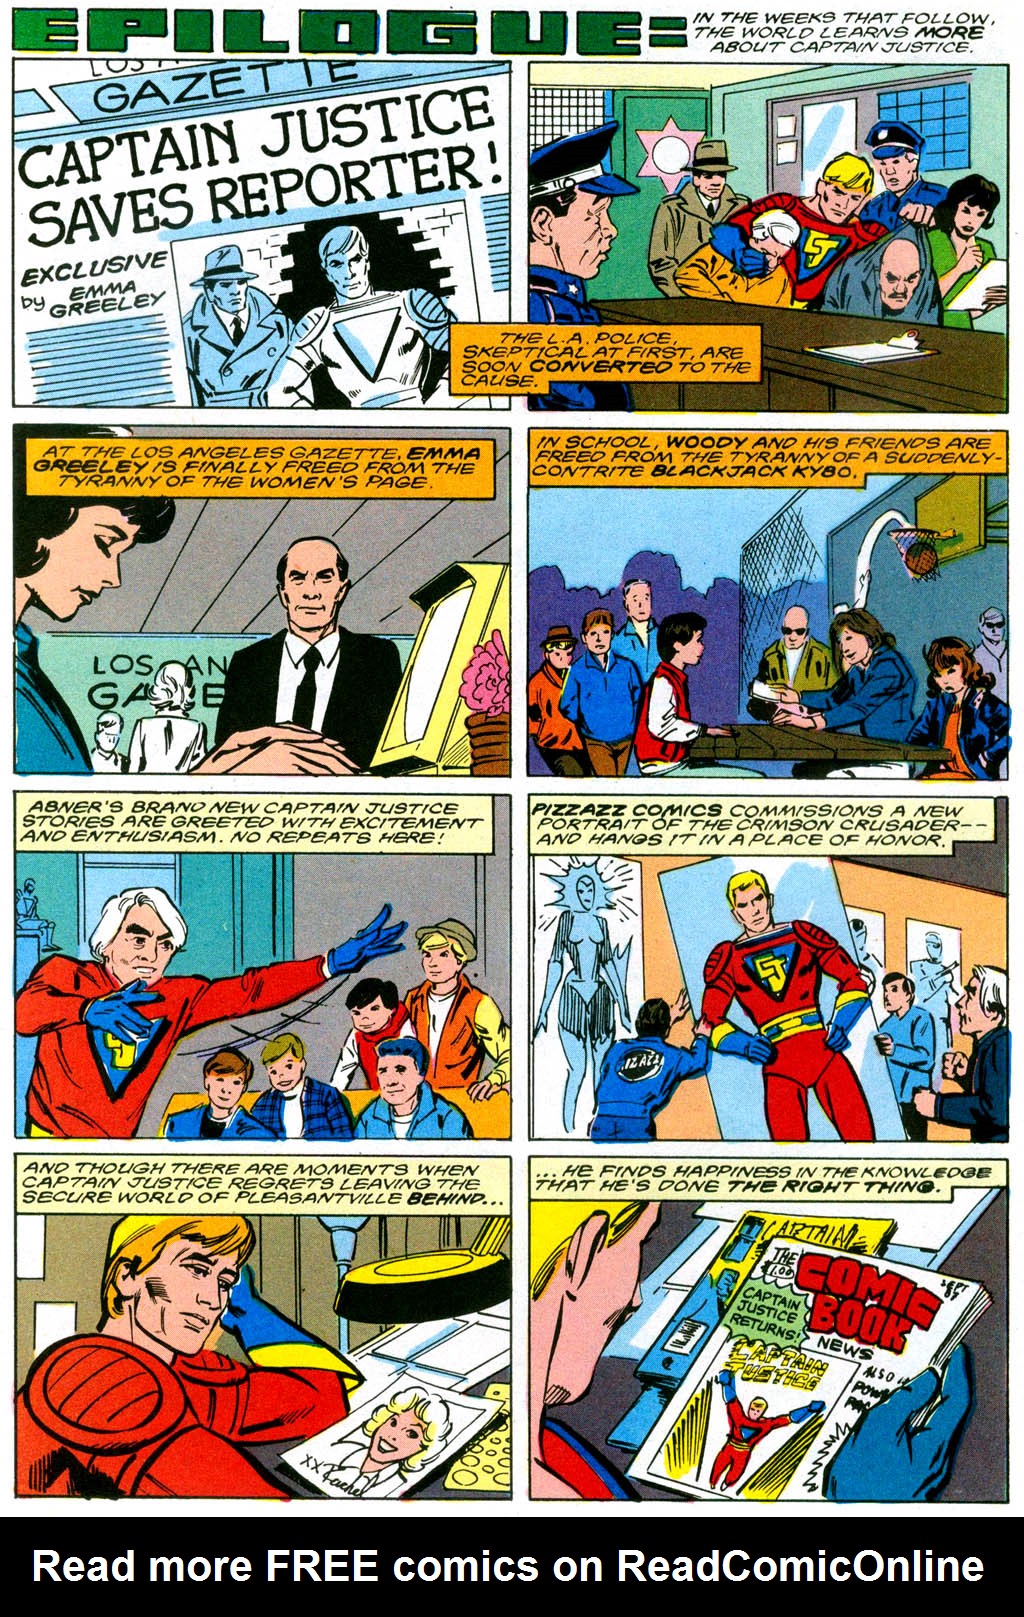 Read online Captain Justice comic -  Issue #2 - 25